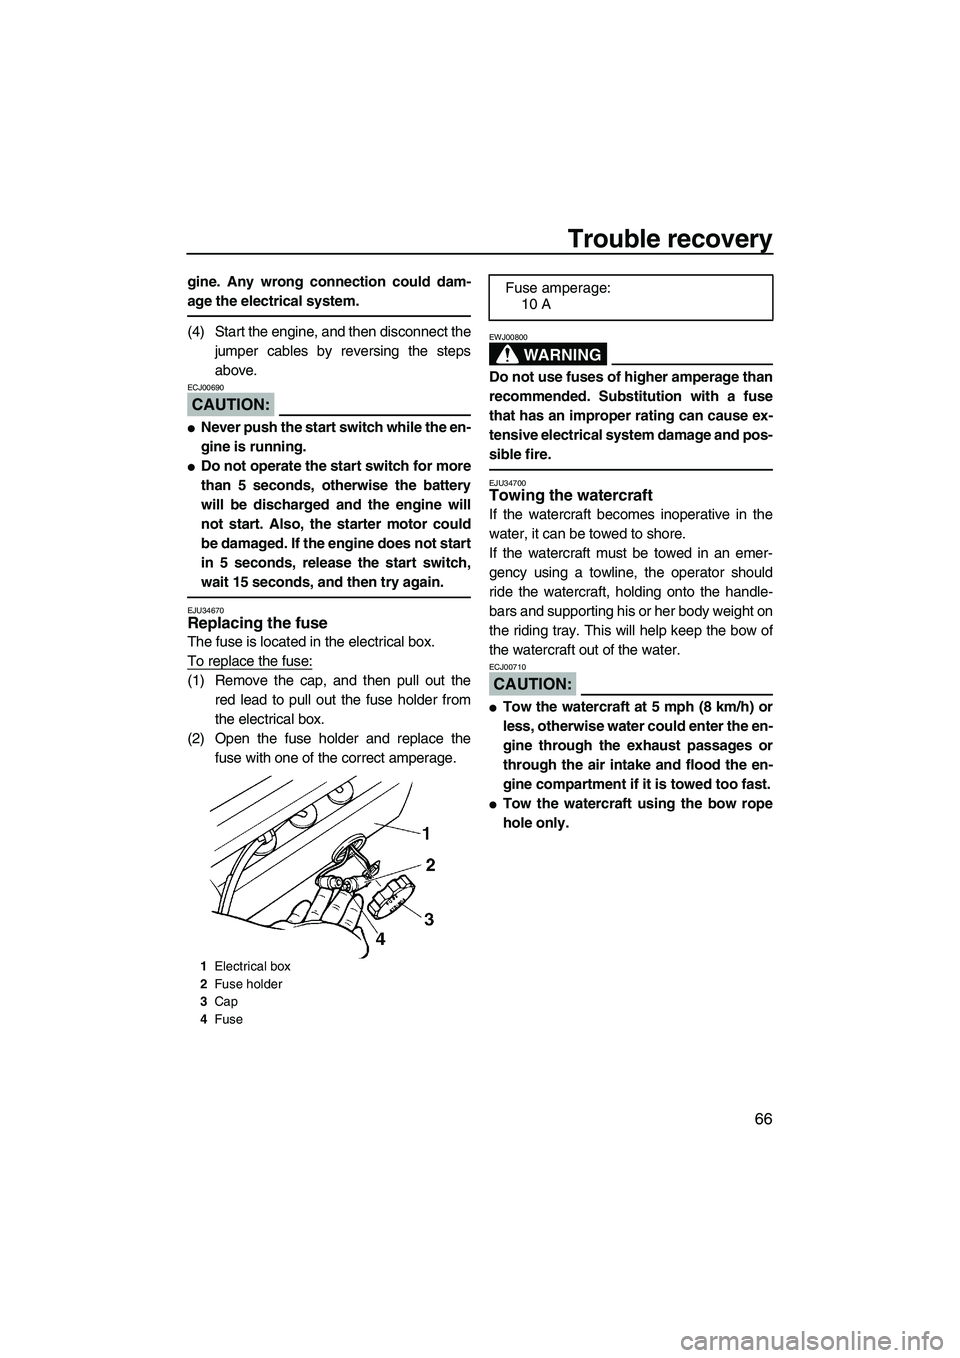 YAMAHA SUPERJET 2007  Owners Manual Trouble recovery
66
gine. Any wrong connection could dam-
age the electrical system.
(4) Start the engine, and then disconnect the
jumper cables by reversing the steps
above.
CAUTION:
ECJ00690
Never 